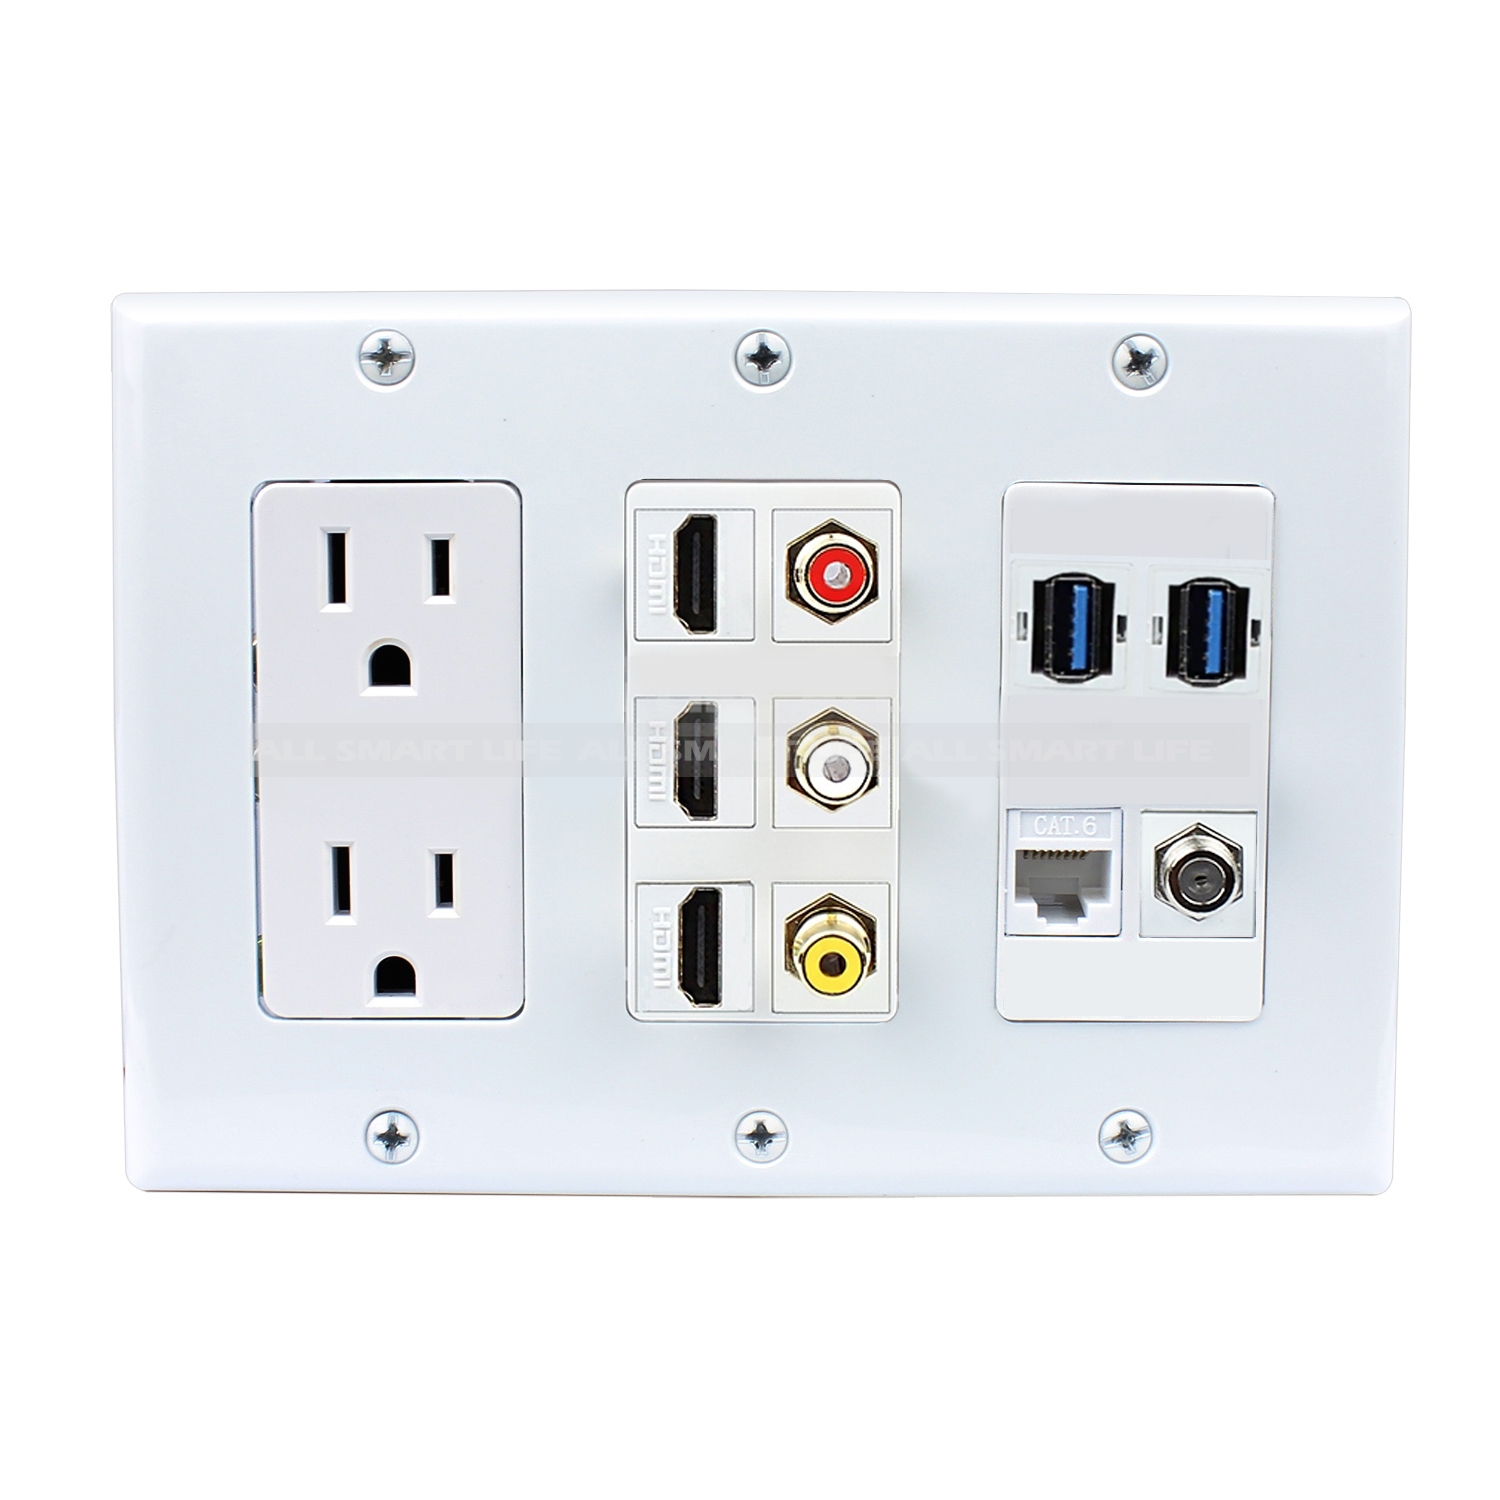 USB 3.0 2Ports Wall Socket Charger Receptacle Outlet Plate Panel Dock Station 